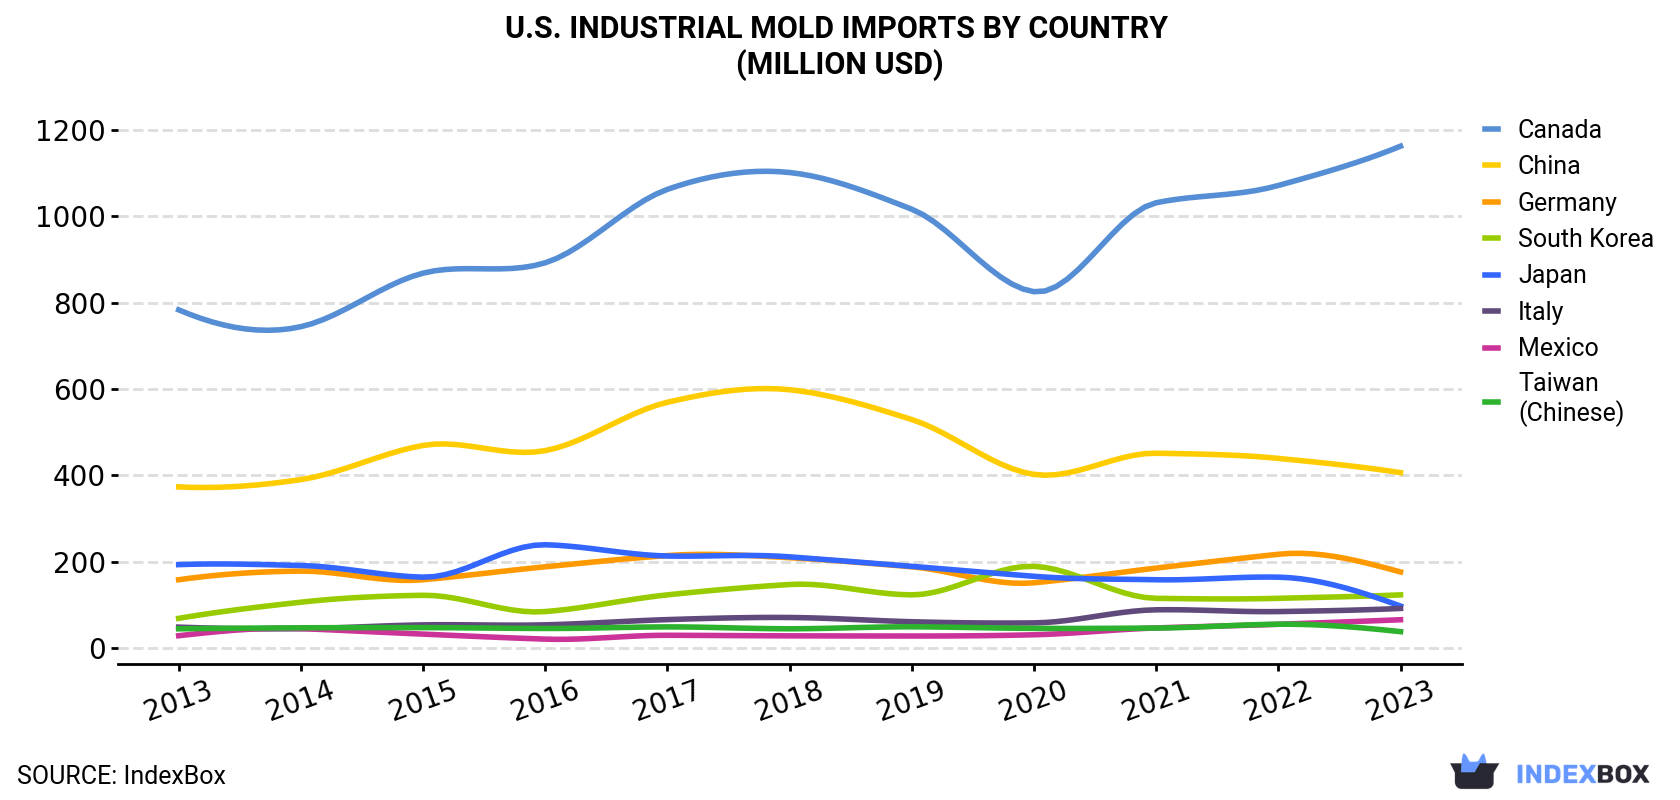 U.S. Industrial Mold Imports By Country (Million USD)